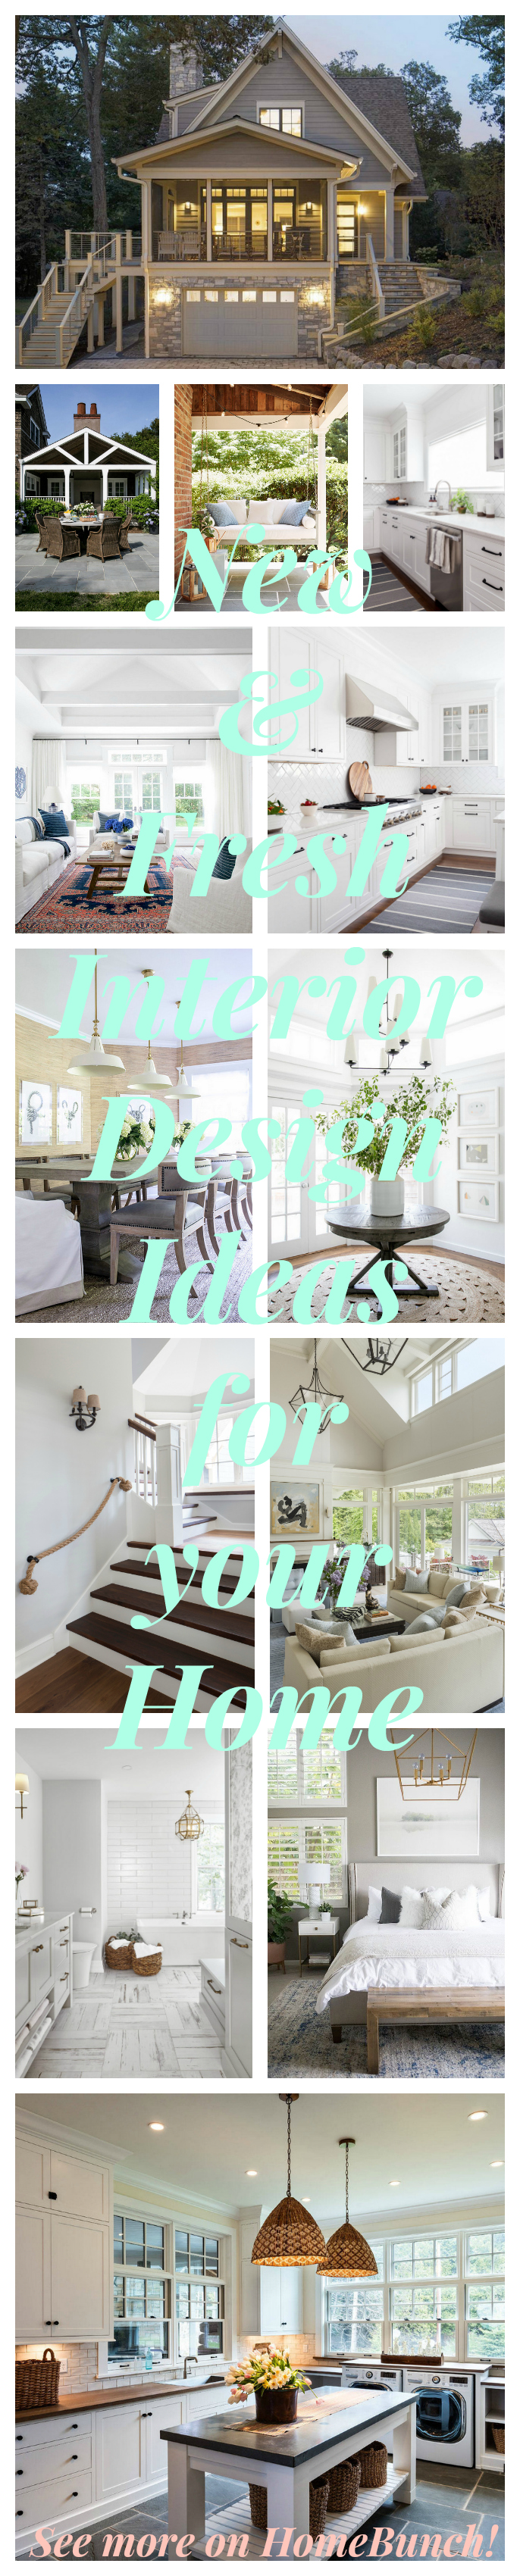 New & Fresh Interior Design Ideas for your Home. See interior ideas for your home on the blog today #interiors #interiordesignideas #interiordesign #interiorsources Home Bunch